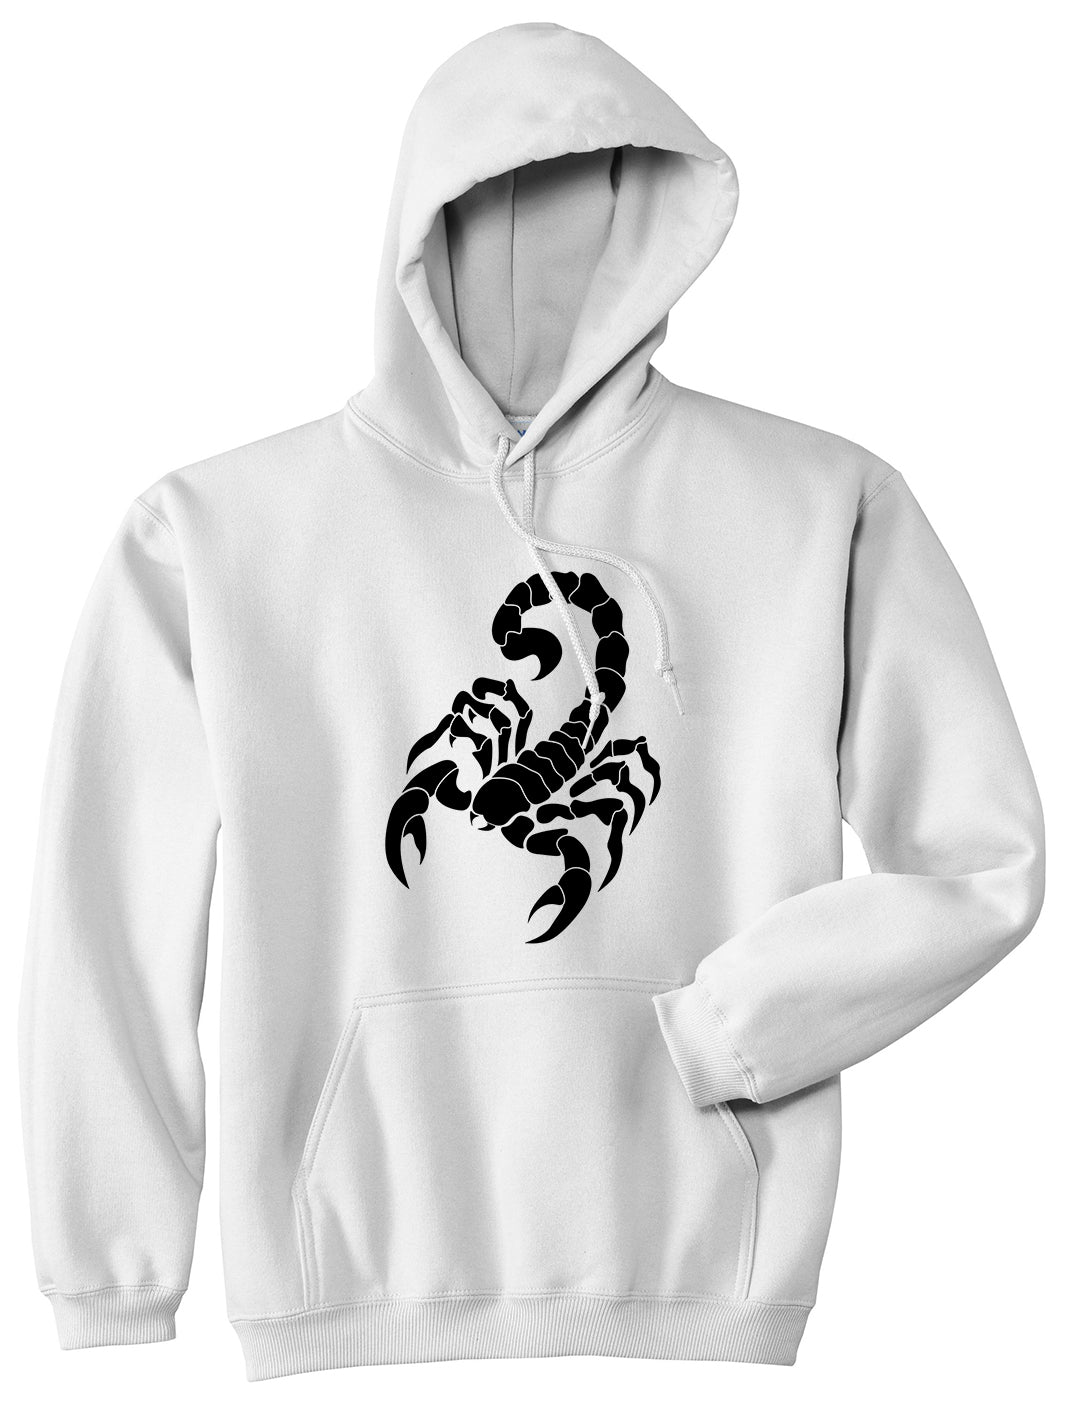 Scorpion Mens Pullover Hoodie White by Kings Of NY